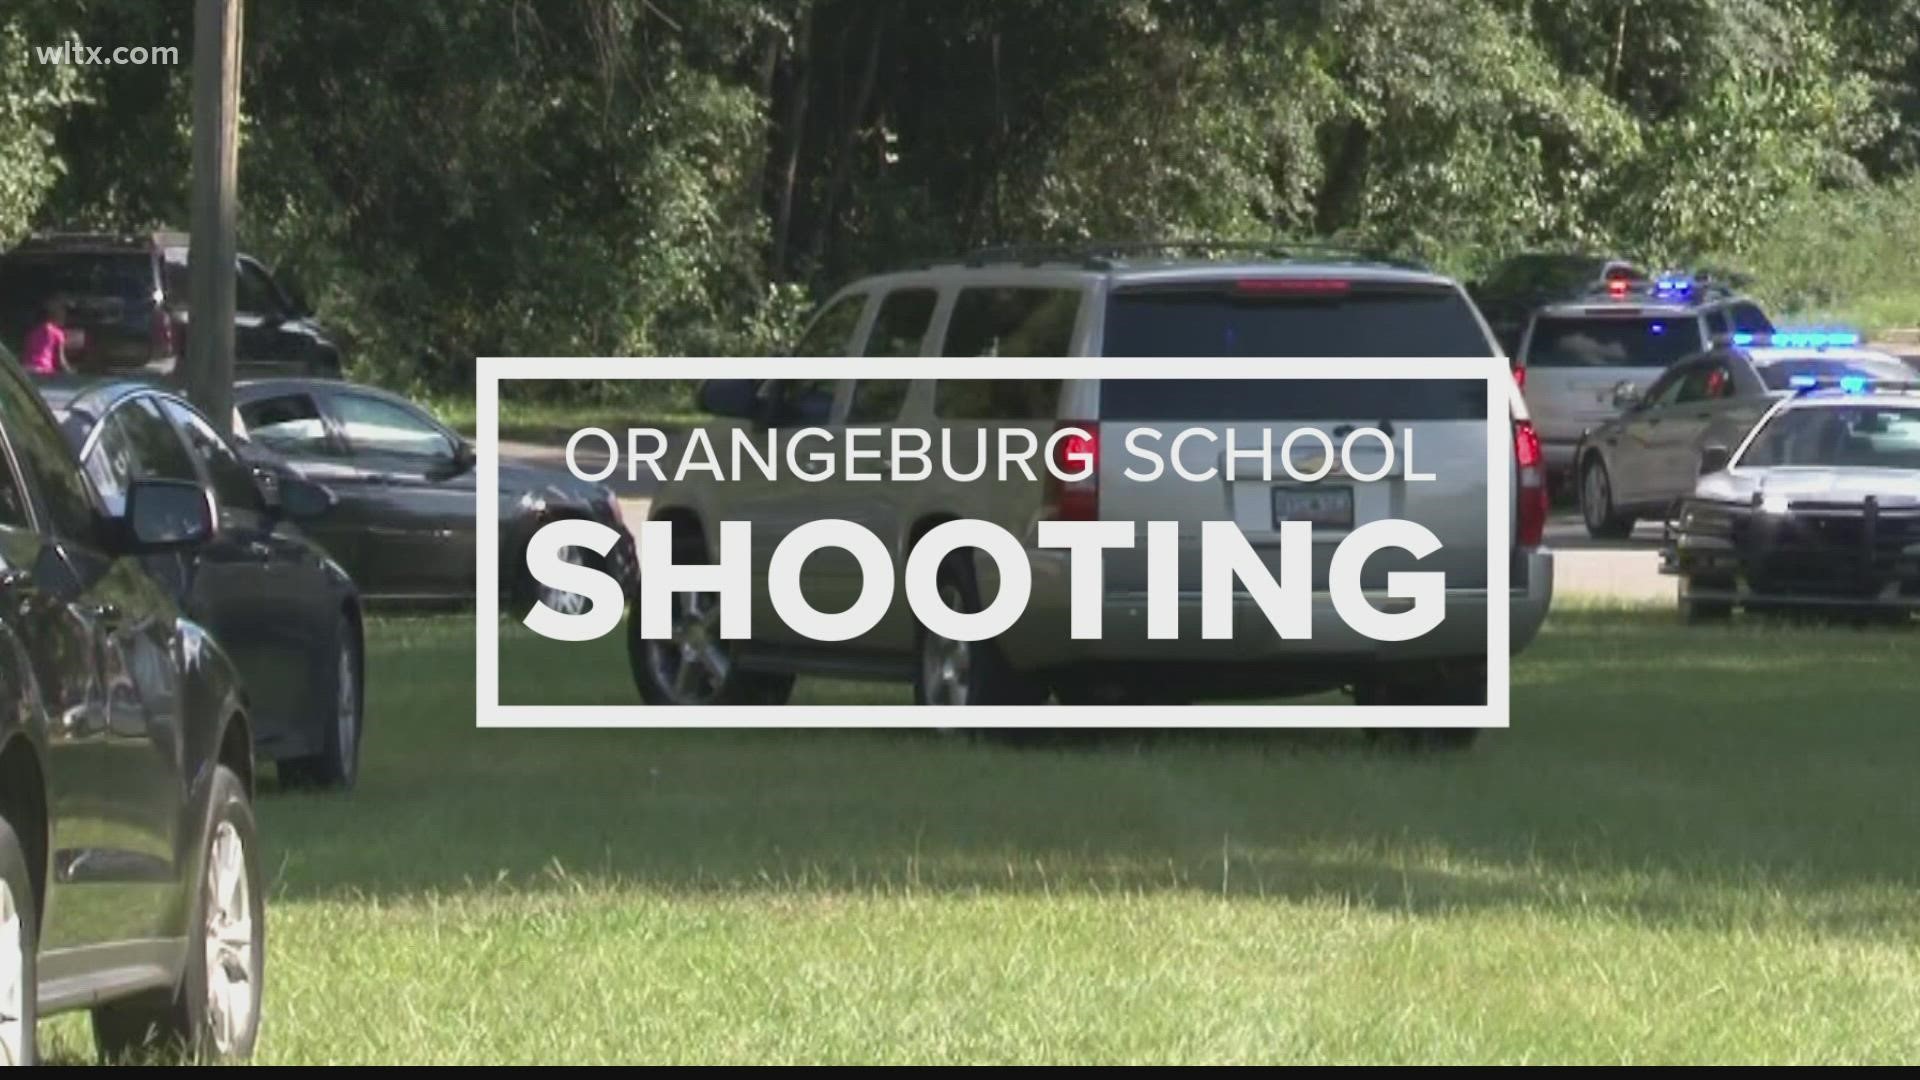 A person is in custody after a shooting at Orangeburg-Wilkinson High School Wednesday  injured three students. Here's what we know.